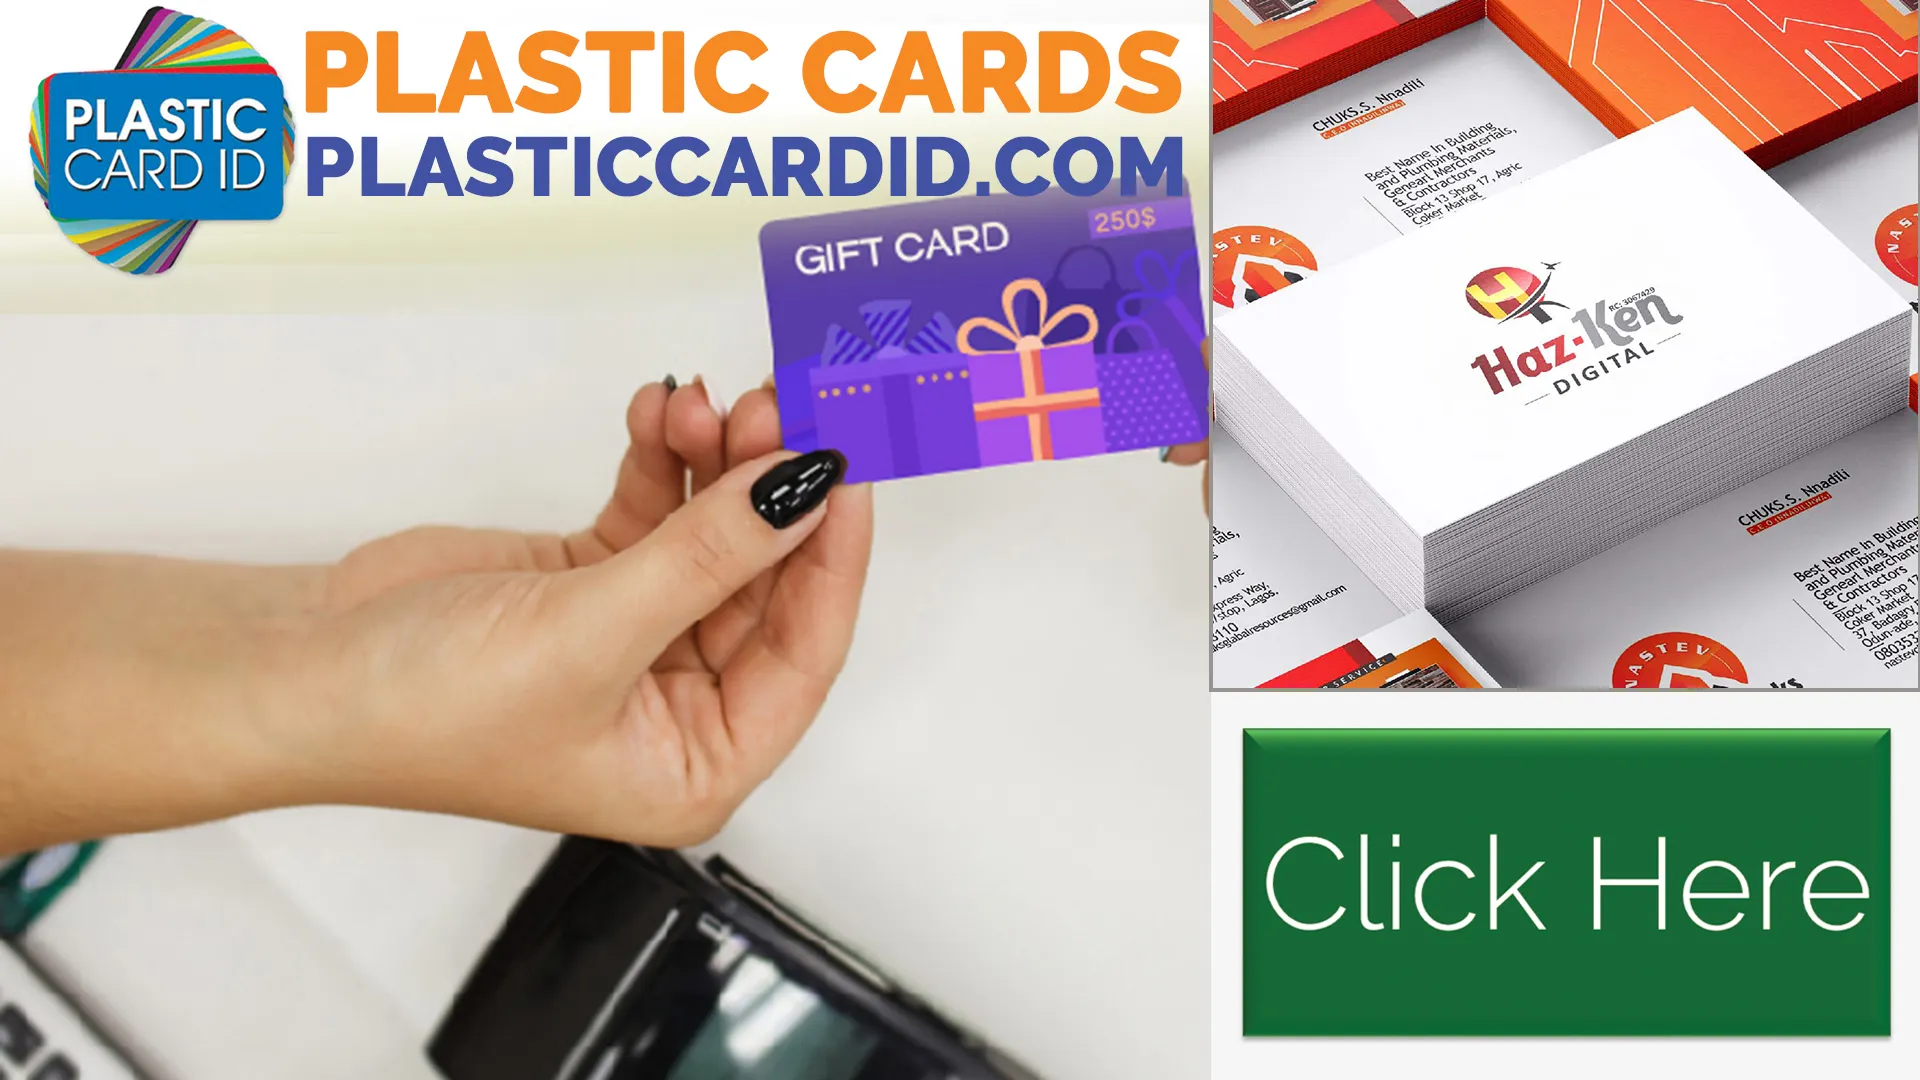 Welcome to the World of Superior Card Solutions with Plastic Card ID




